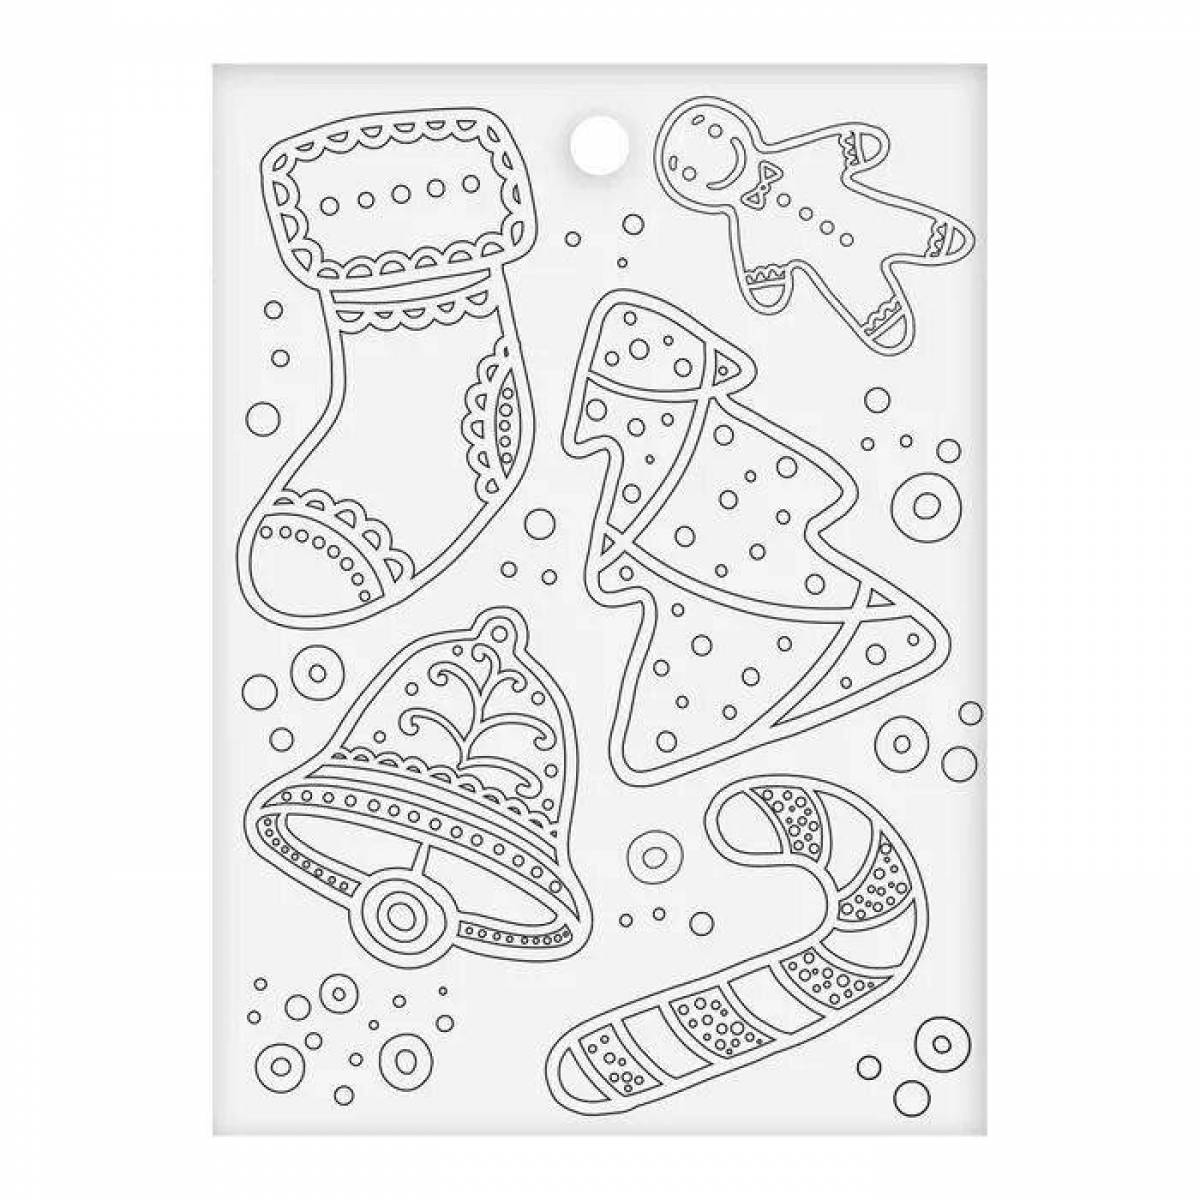 Fun coloring christmas stickers